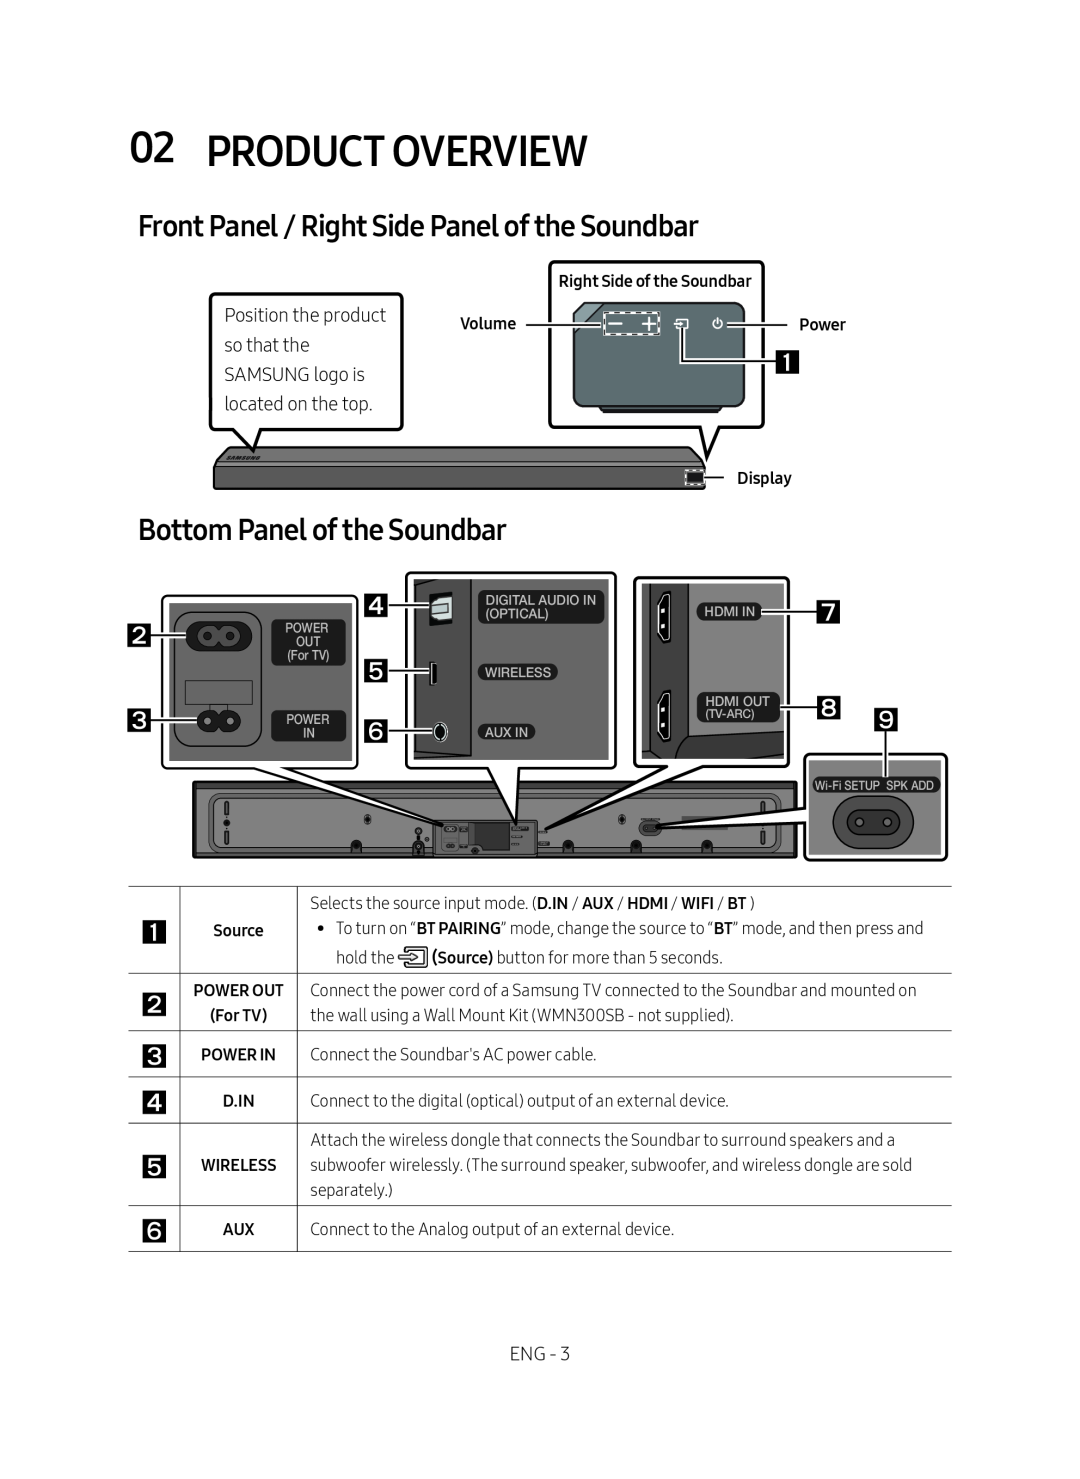 Front Panel / Right Side Panel of the Soundbar Standard HW-MS650